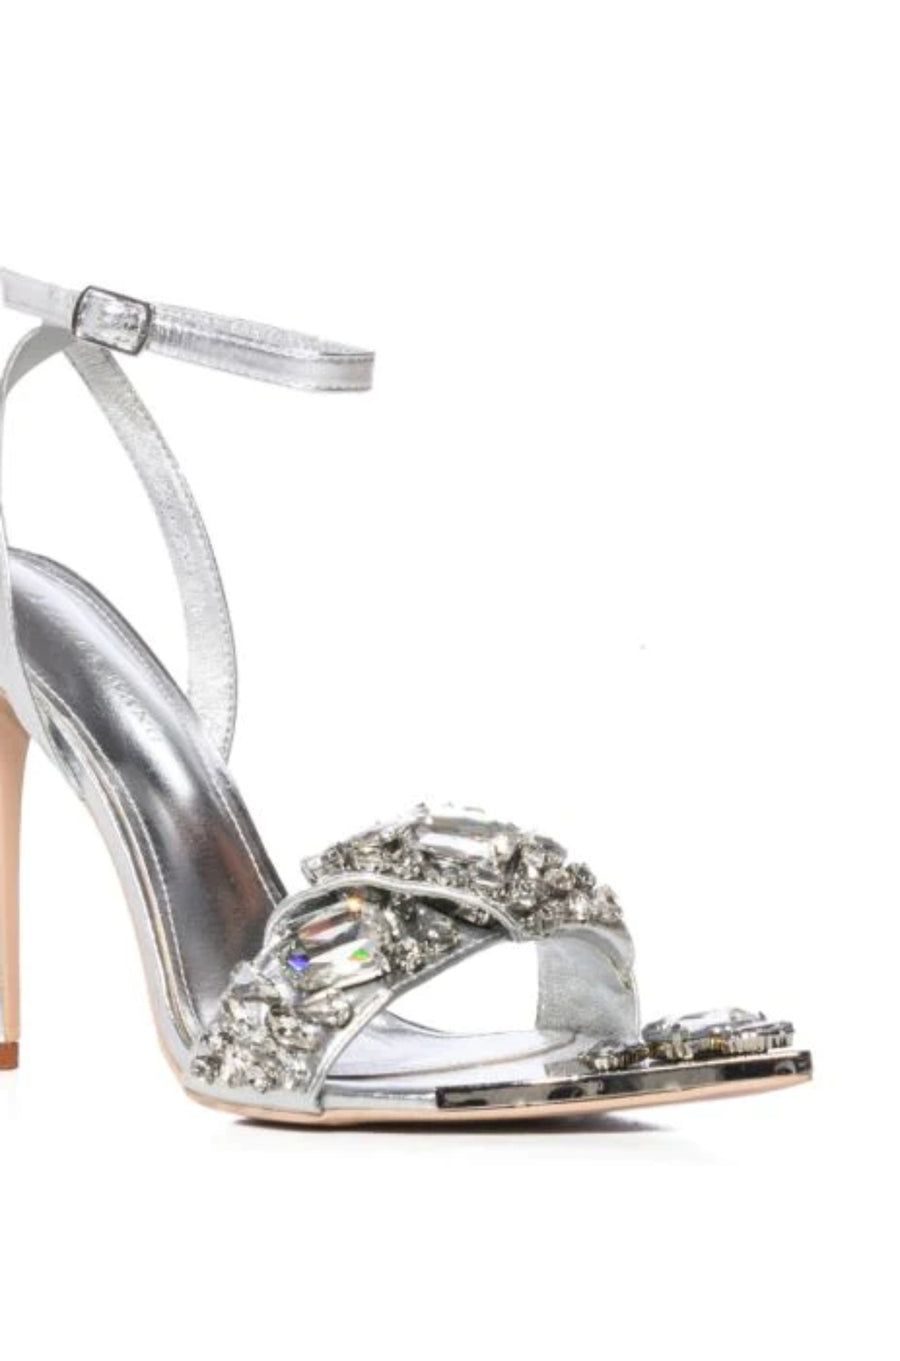 TILLY SILVER POINTED TOE OPEN SANDAL